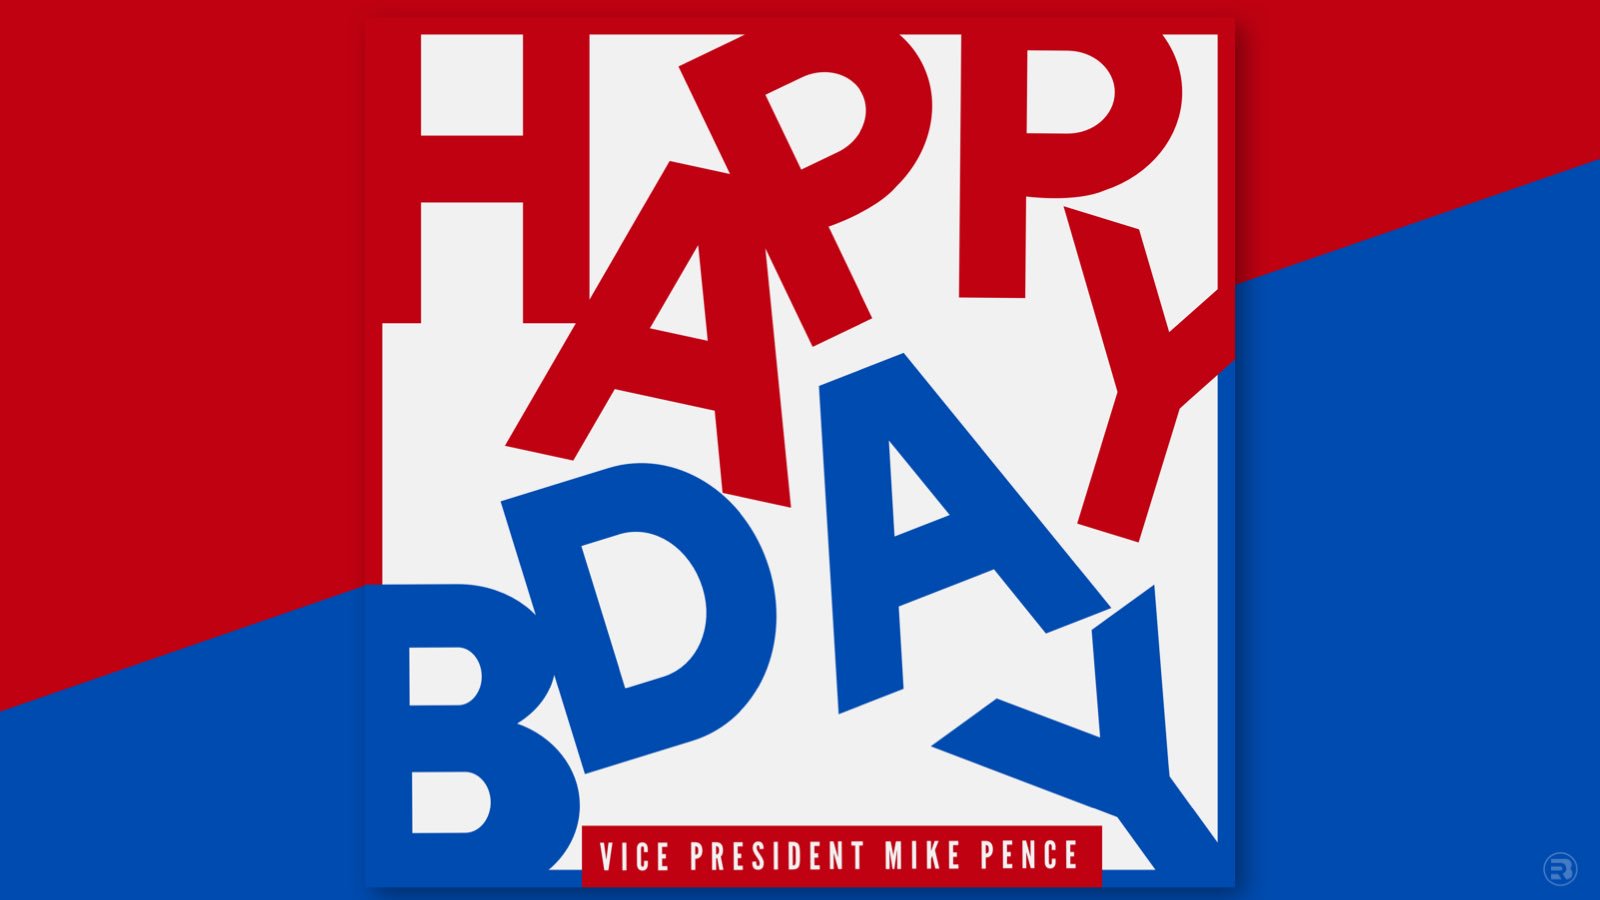 Wishing a very Happy Birthday to the Vice President of the United States, 